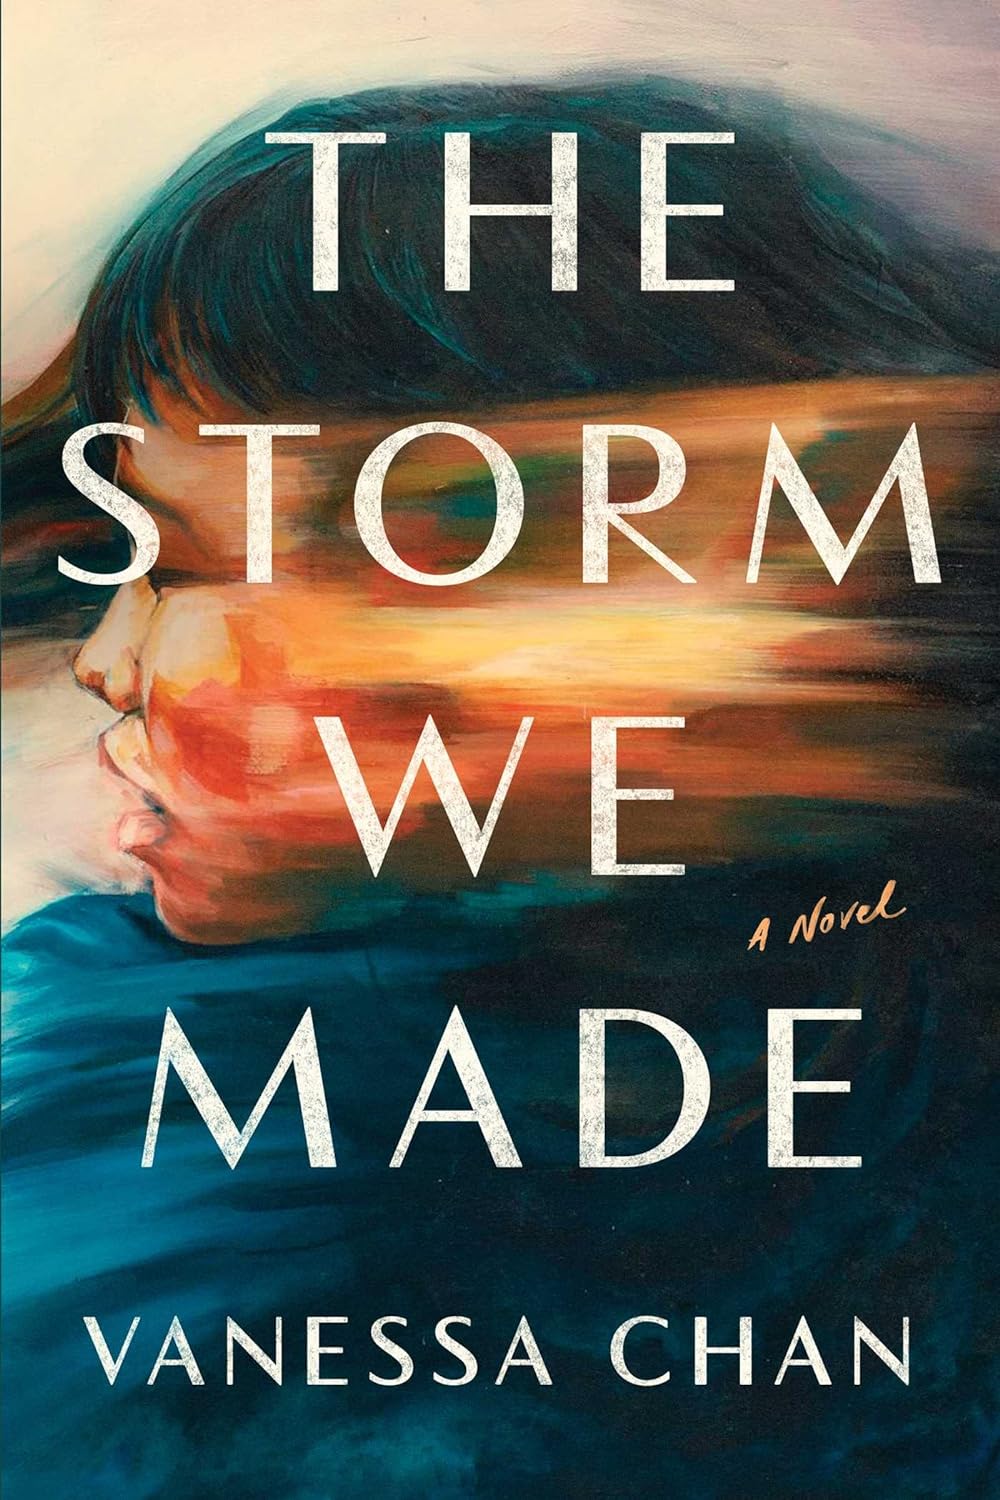 Image for "The Storm We Made"